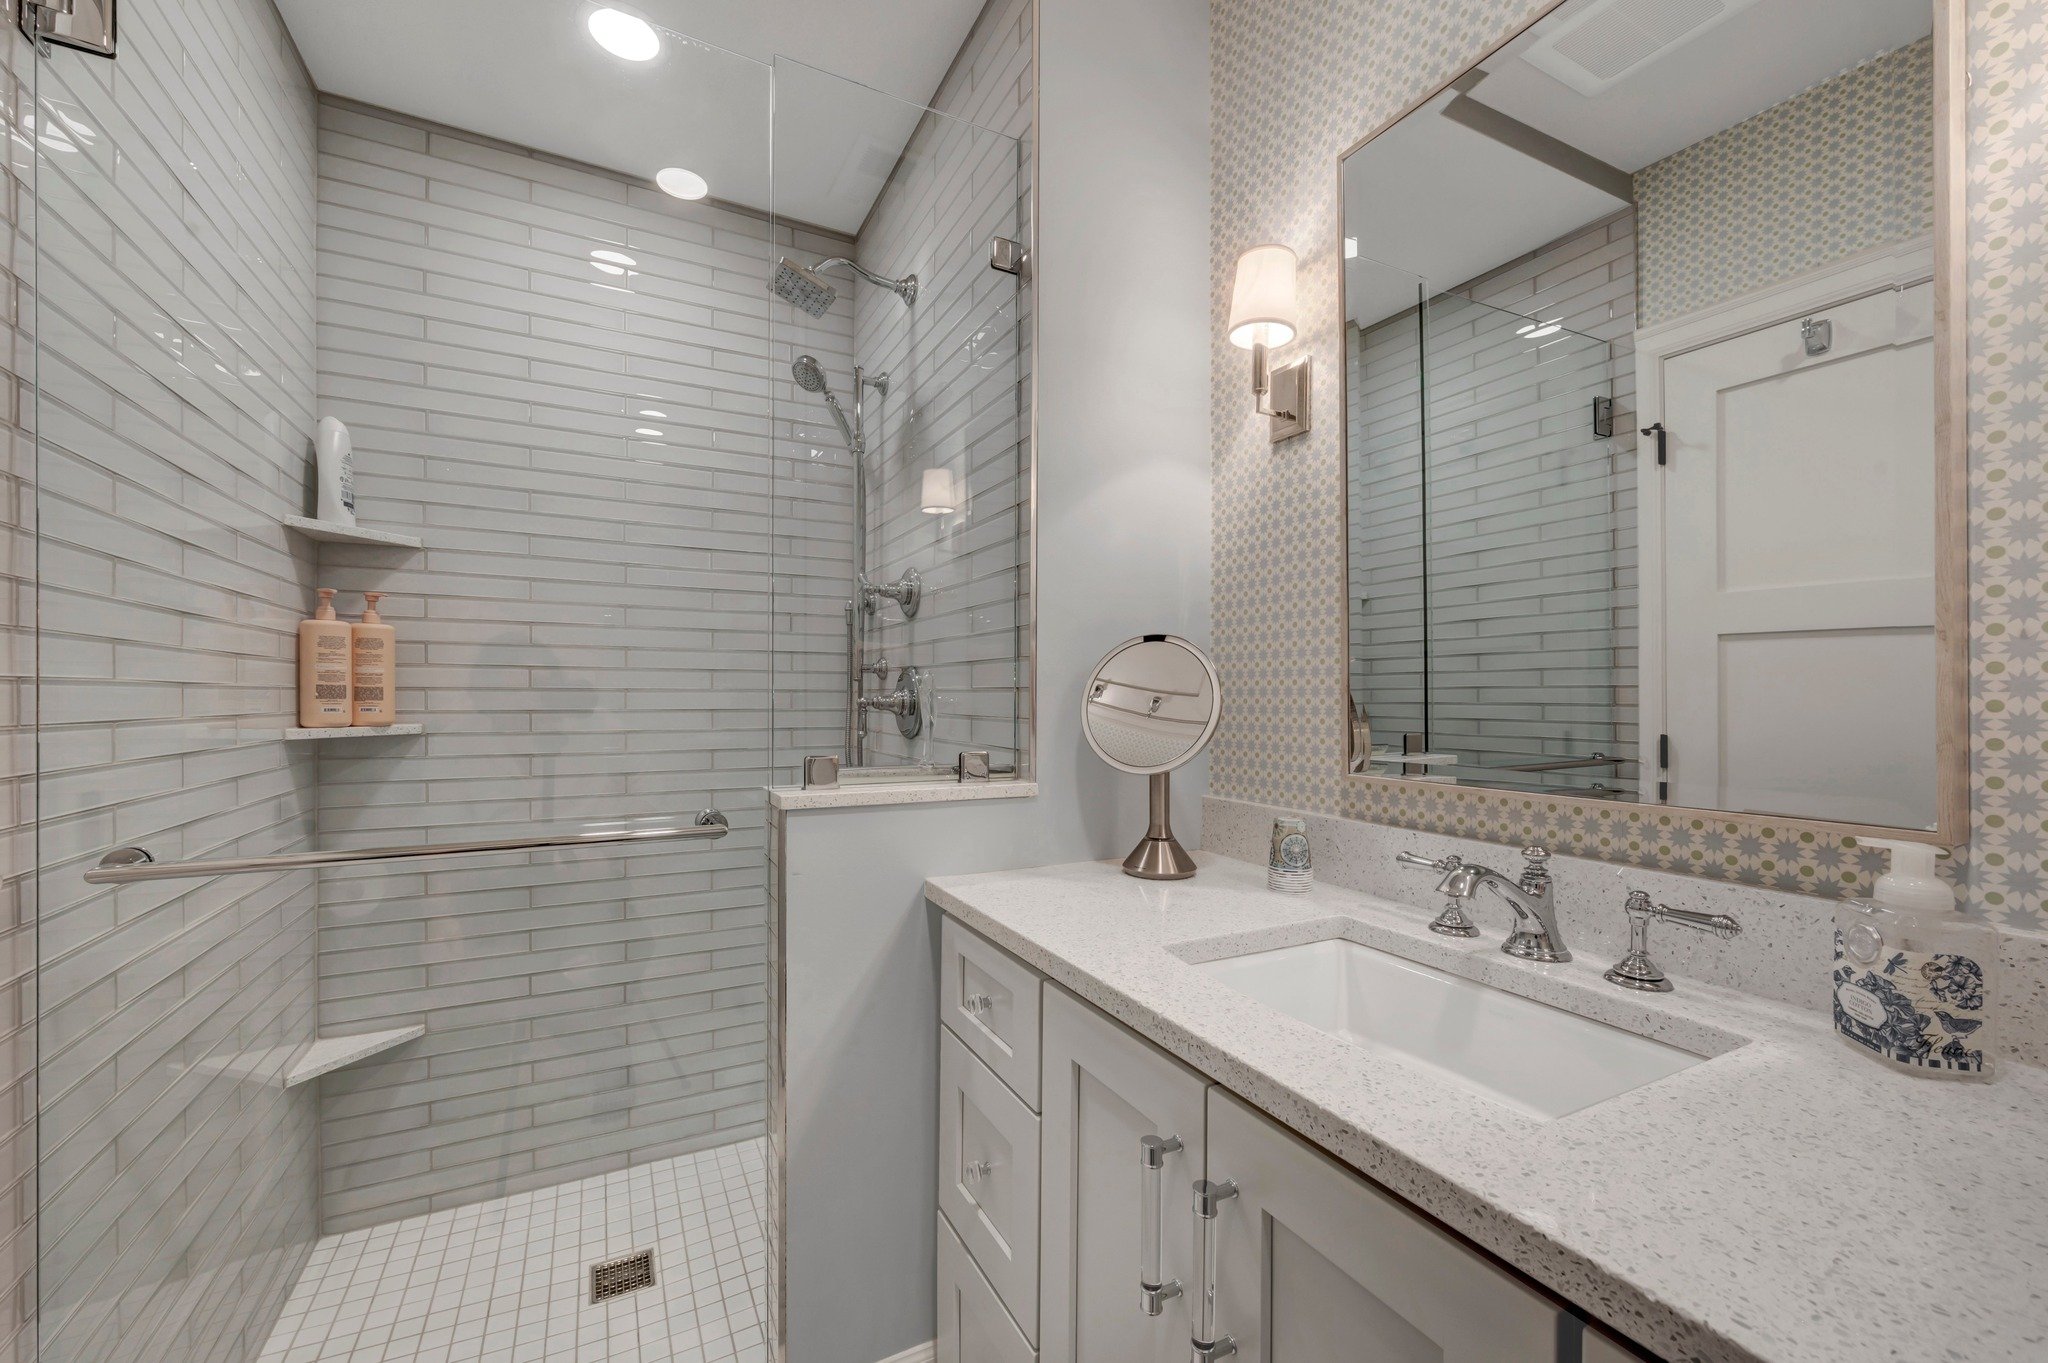 Aesthetics are important, but functionality is key! We are loving this white and bright bathroom! 🤍🛁

To learn more about our process and services, click the link in our bio 🔗 or give us a call (952) 937-0589.

#juliandesign #shapingtheartofliving